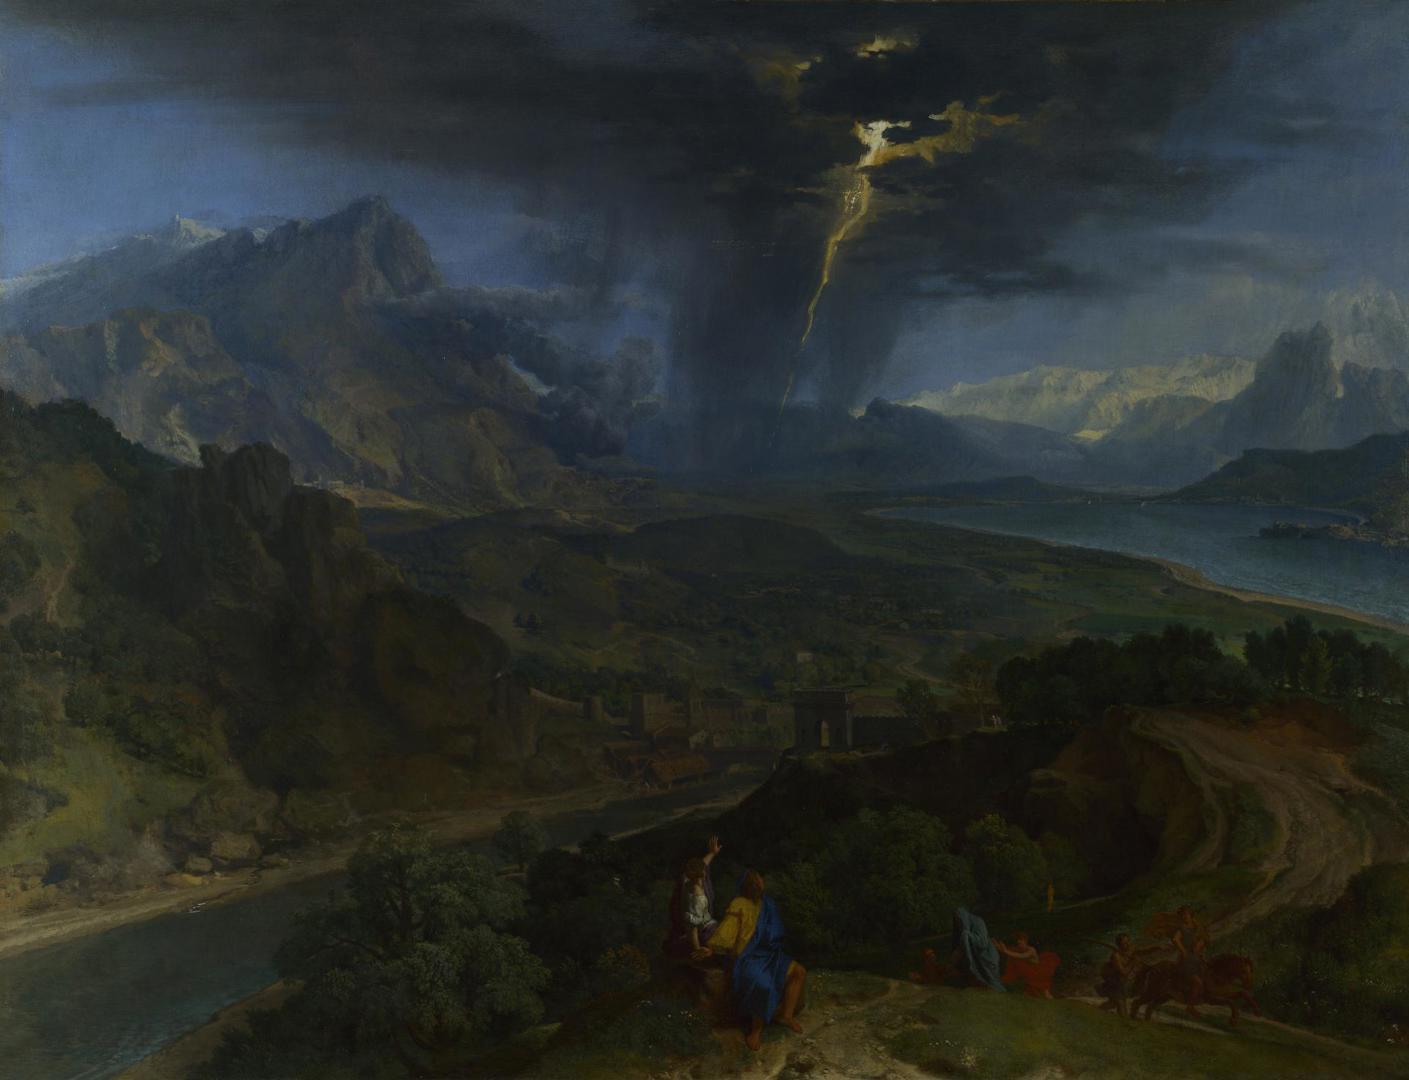 Mountain Landscape with Lightning by Francisque Millet